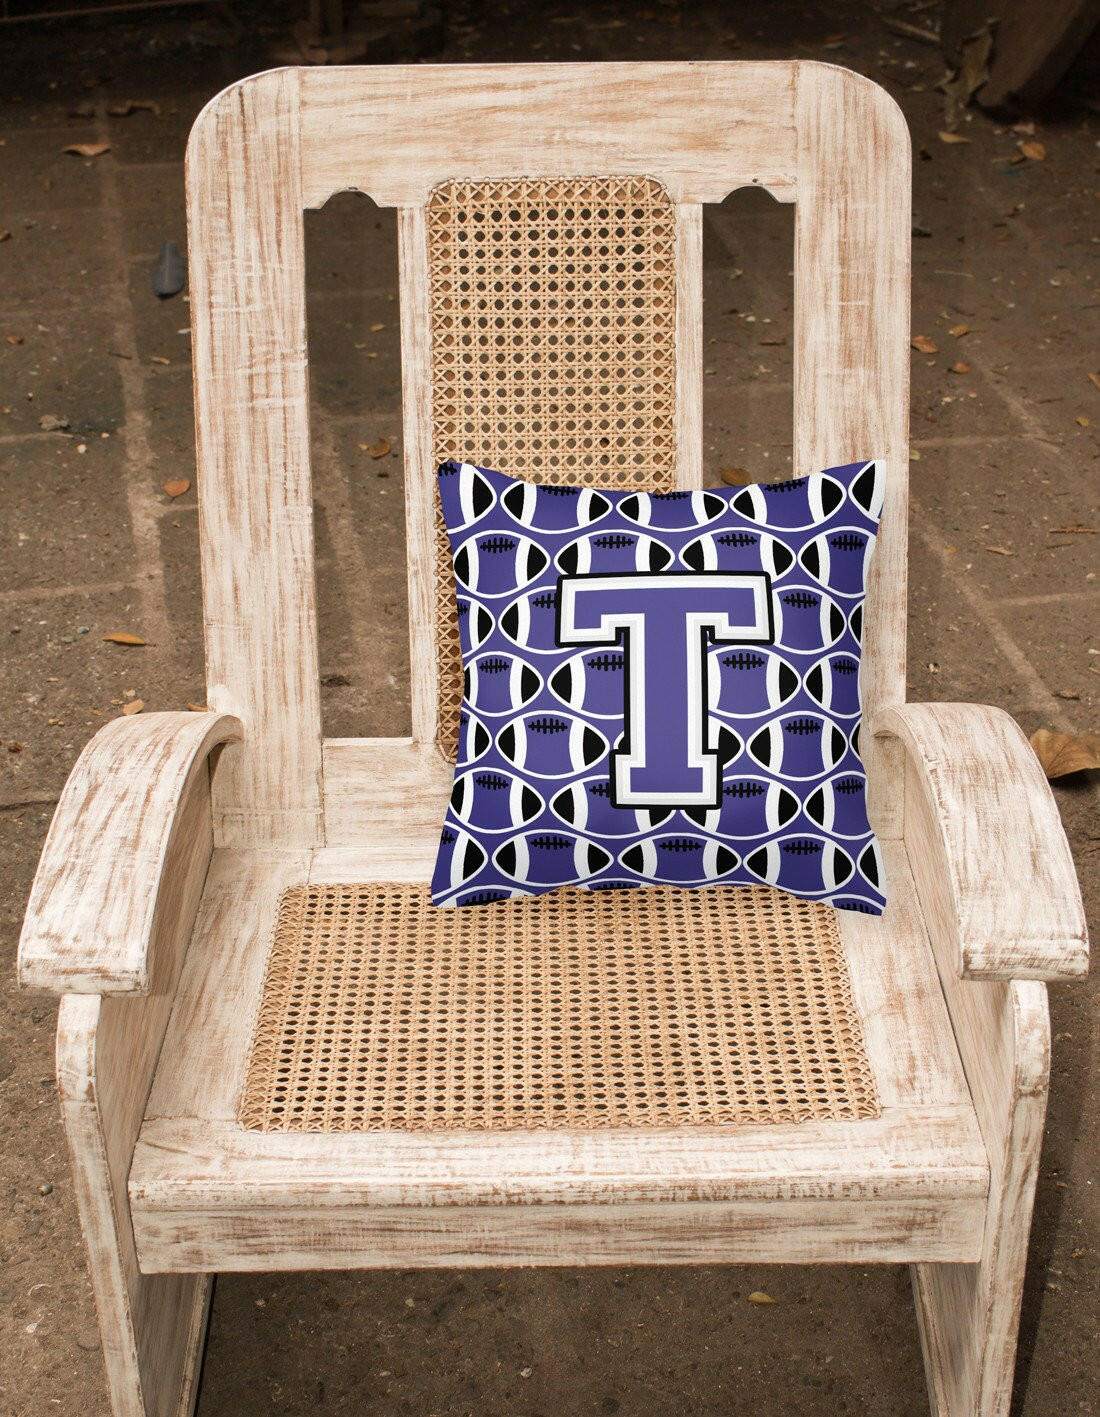 Letter T Football Purple and White Fabric Decorative Pillow CJ1068-TPW1414 by Caroline's Treasures